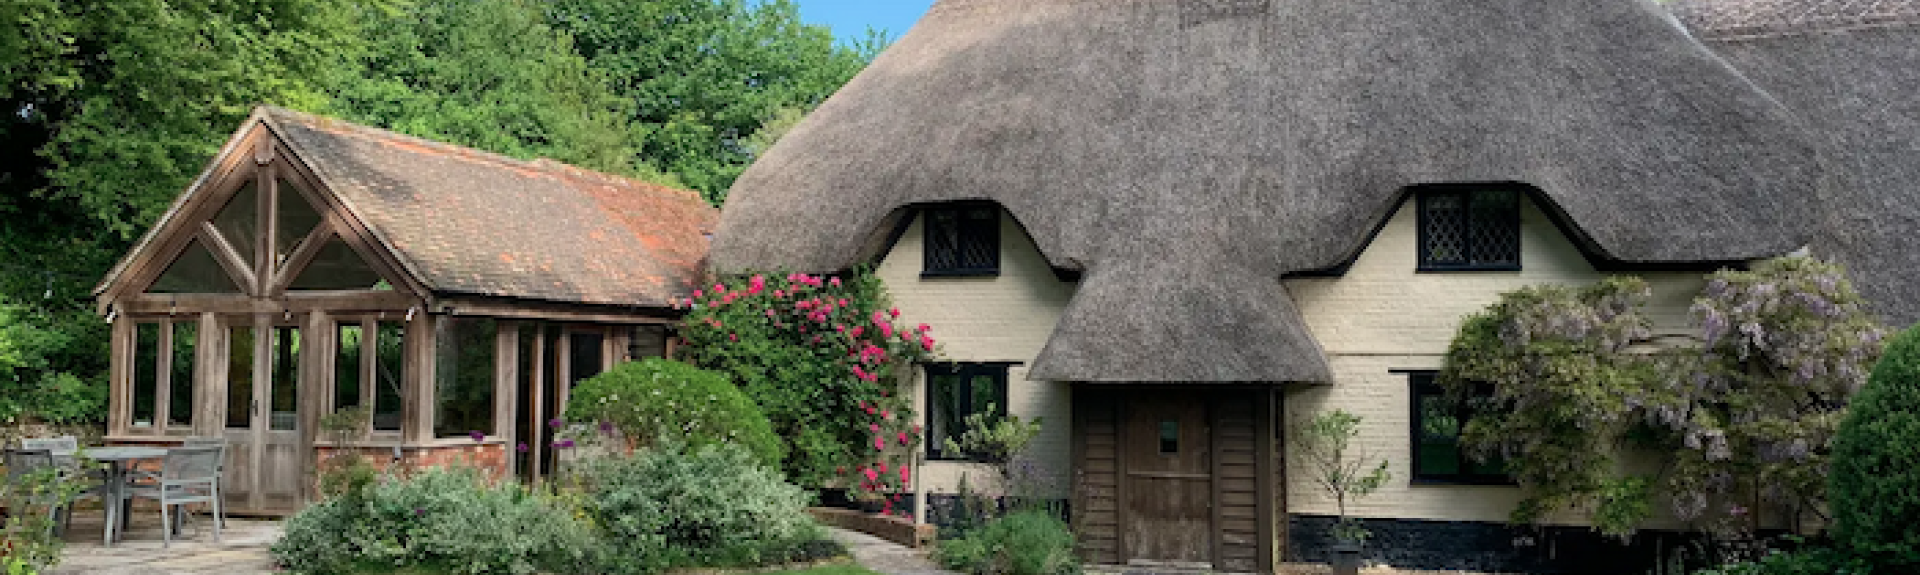 A thatched holiday cottage in Blandford Forum with a slate-roofed extension overlooks a well-kept lawn